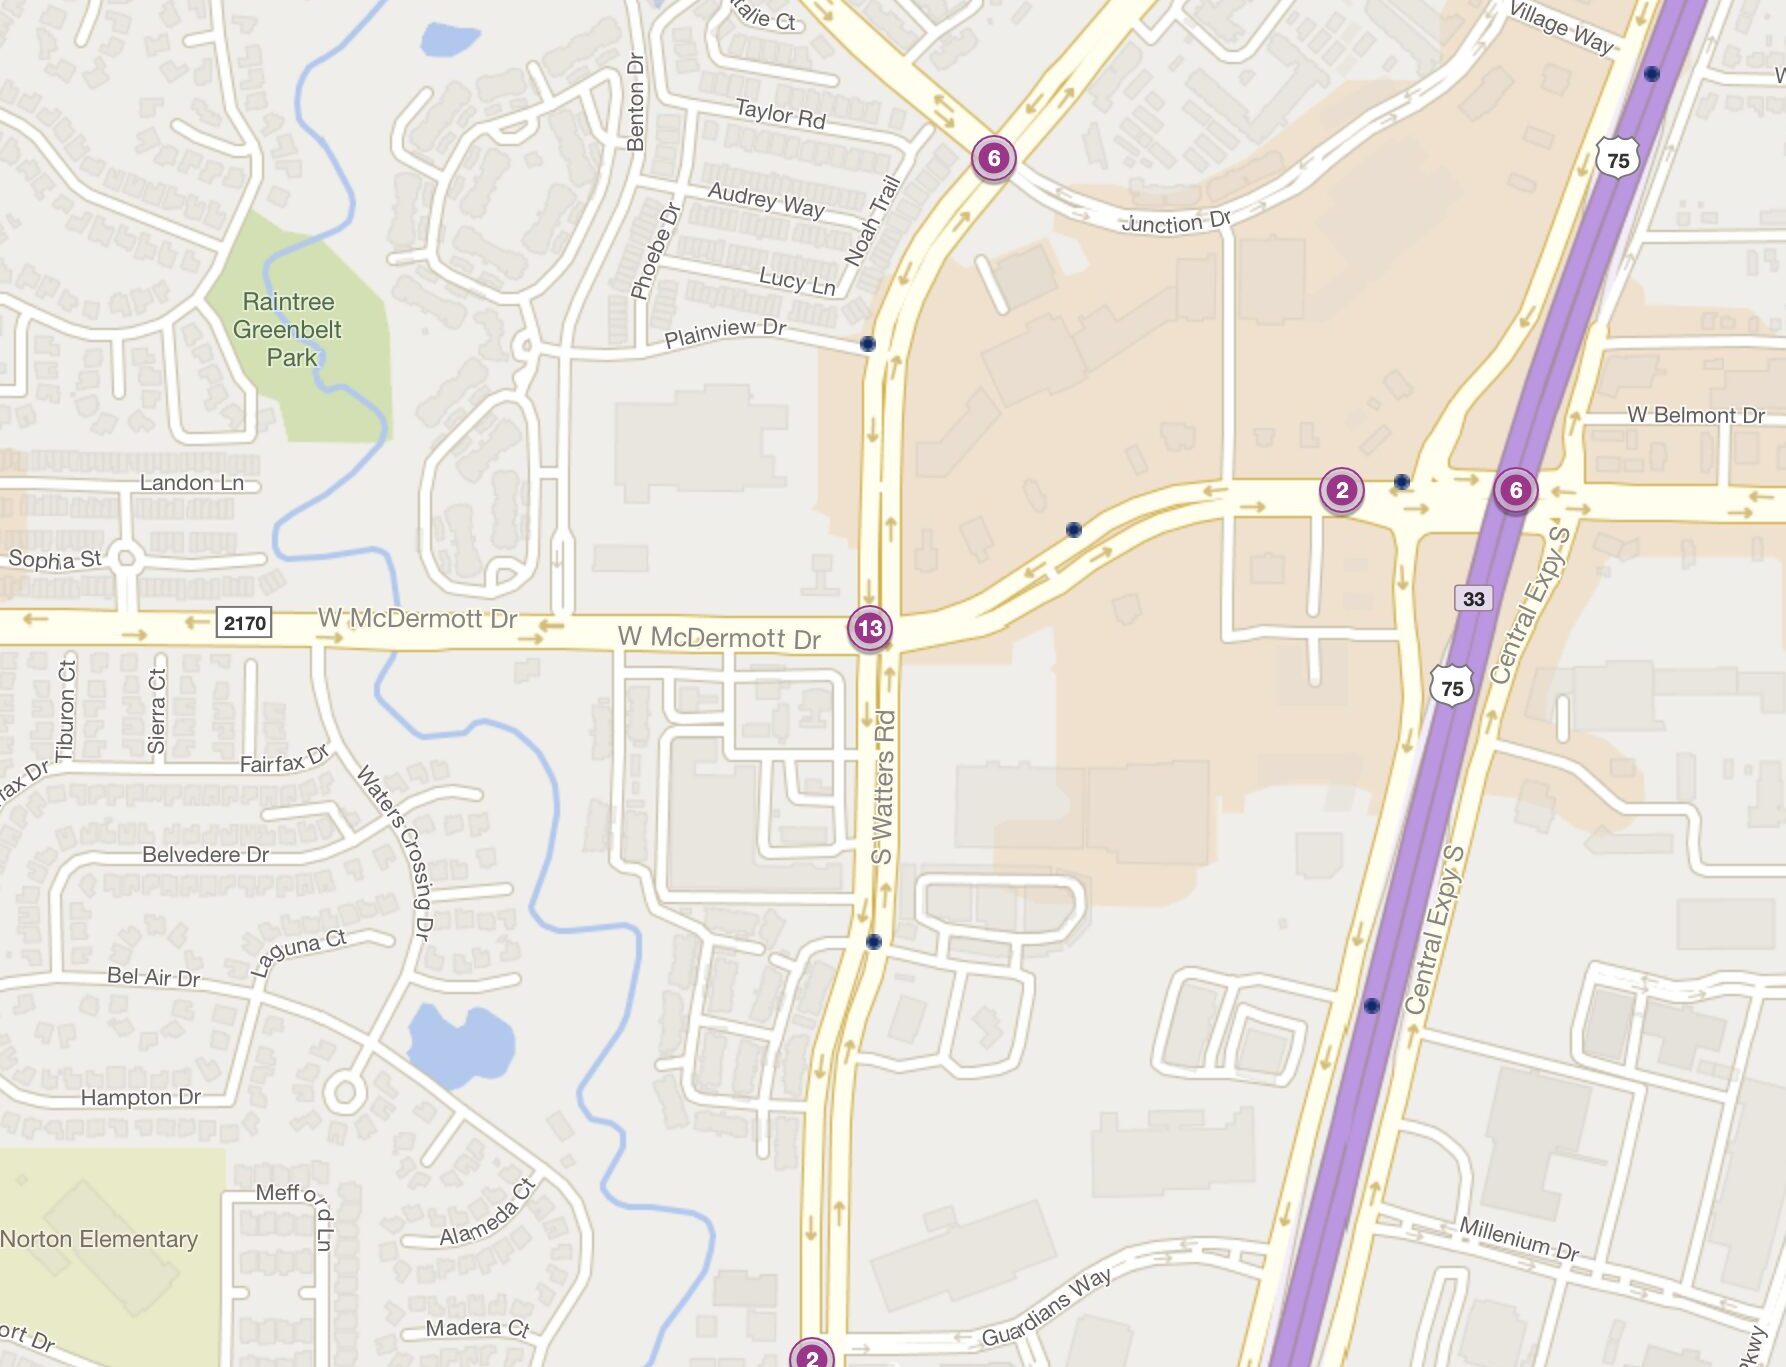 Cluster Map of 2023 Car Accidents at McDermott Dr. & Watters Rd. (TXDOT)